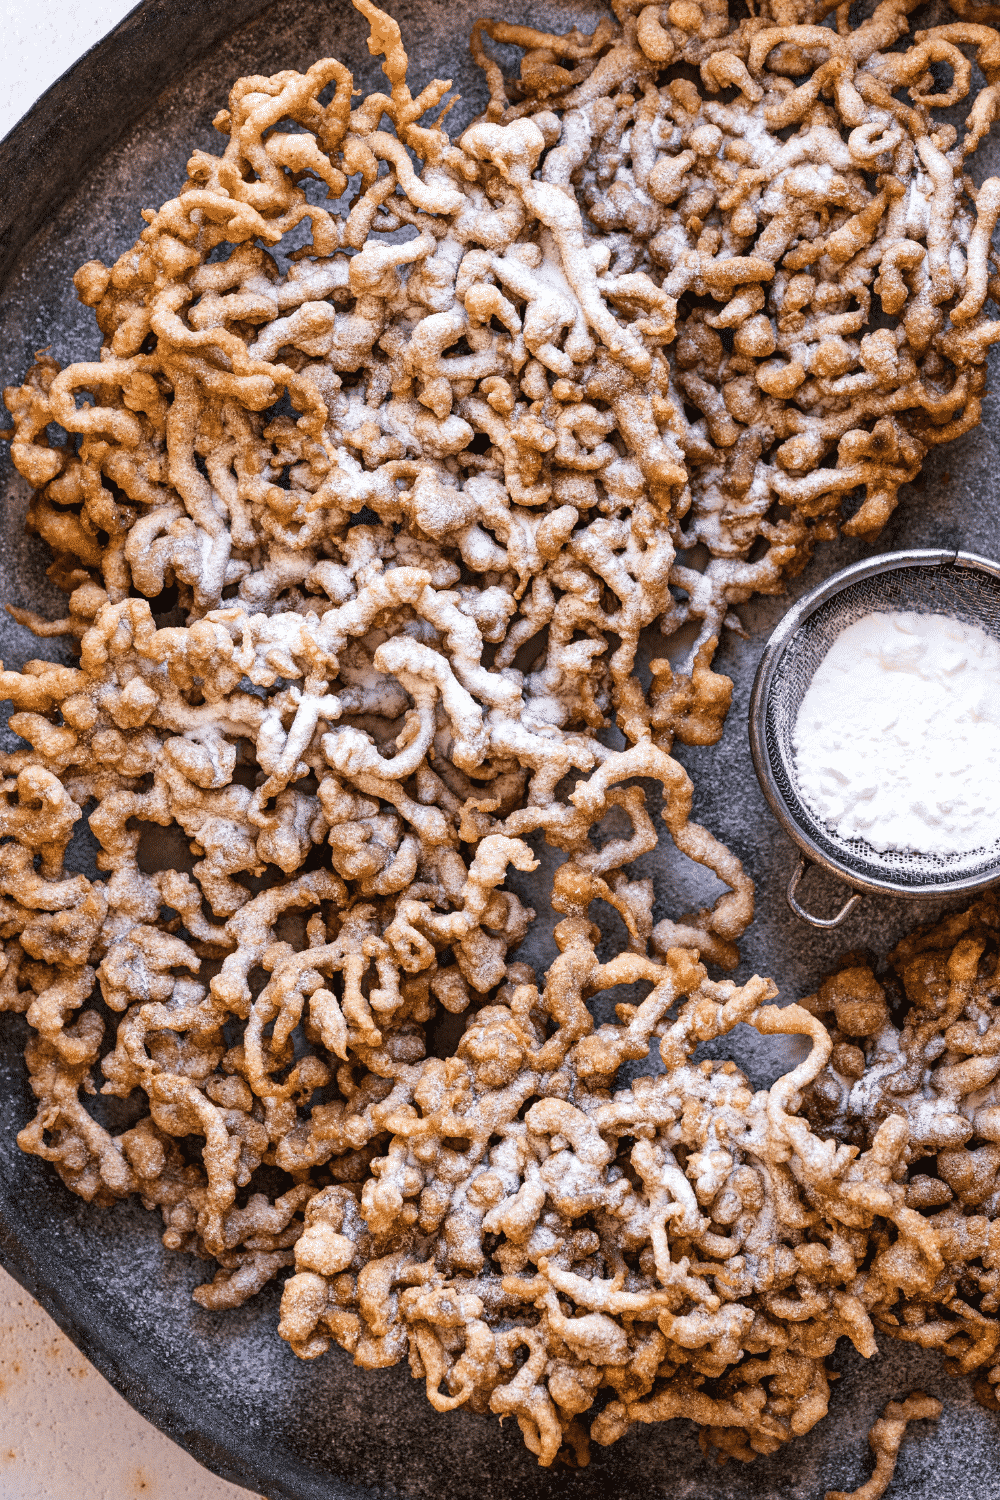 A bunch of funnel cakes on a black plate. A small sifter filled with powdered sugar is to the right of the funnel cakes.